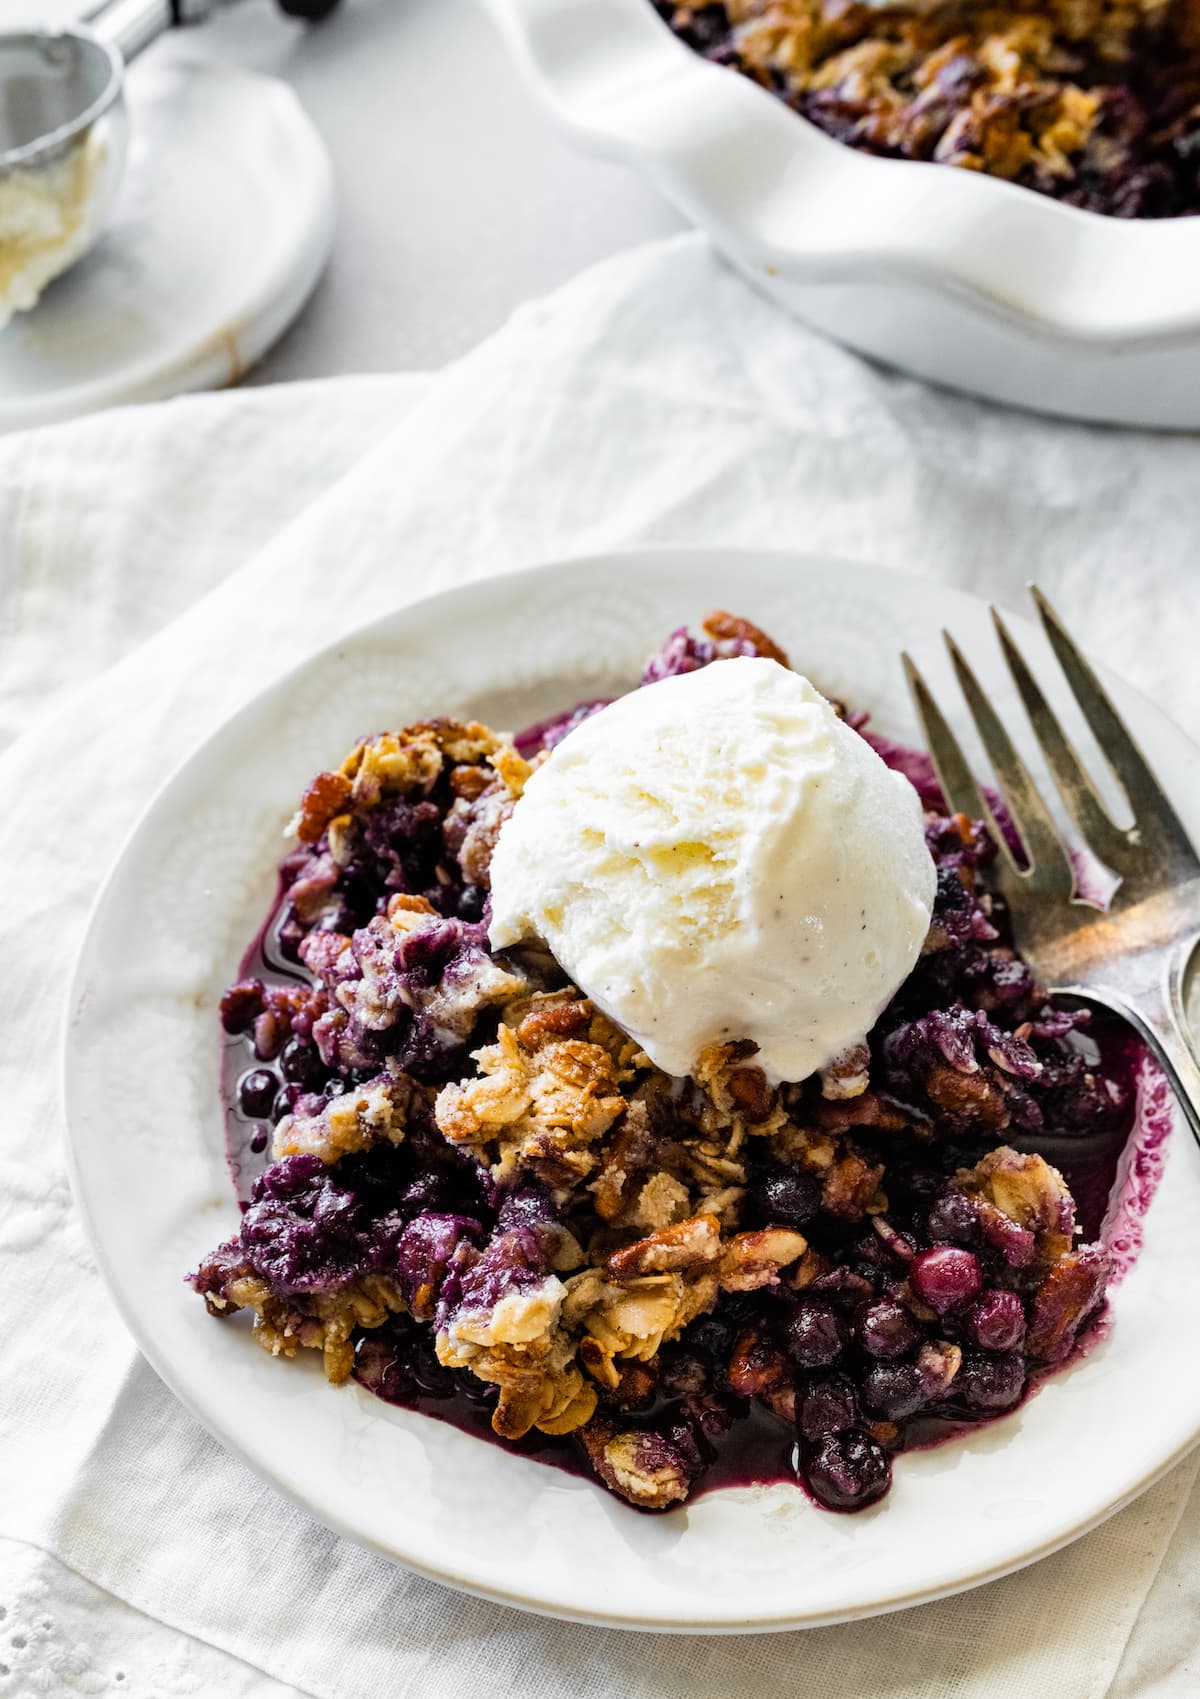 Blueberry crumble in a small bowl with a metal fork and a scoop of vanilla ice cream on top.